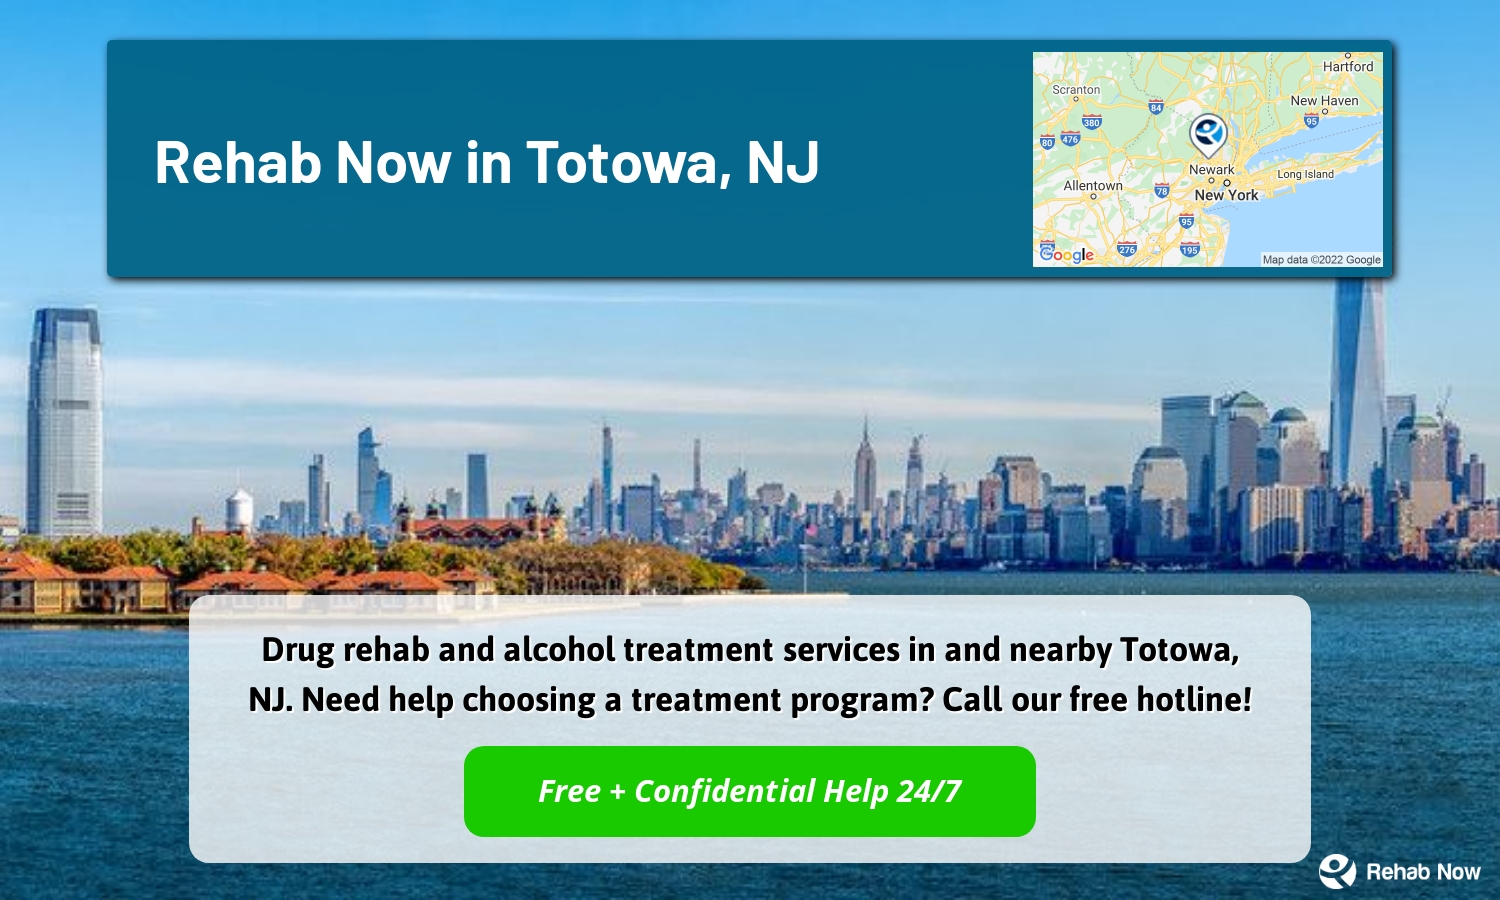 Drug rehab and alcohol treatment services in and nearby Totowa, NJ. Need help choosing a treatment program? Call our free hotline!